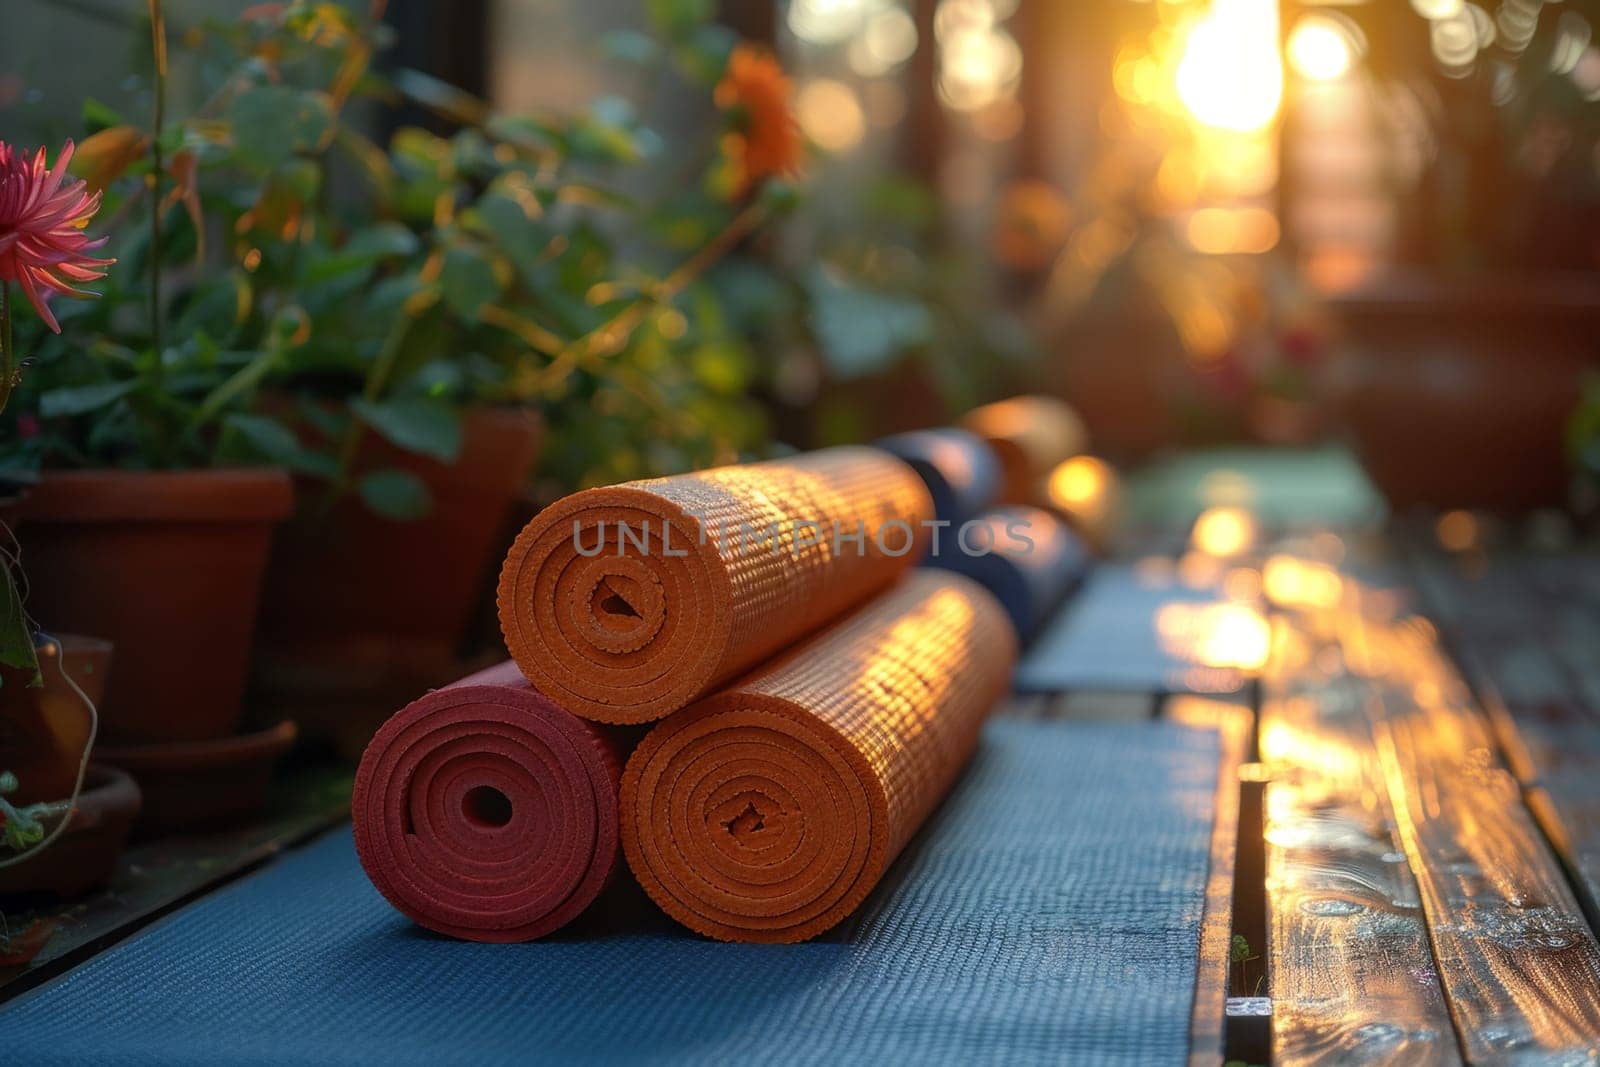 There is a set of yoga mats on the wooden floor in the room. International Yoga Day by Lobachad